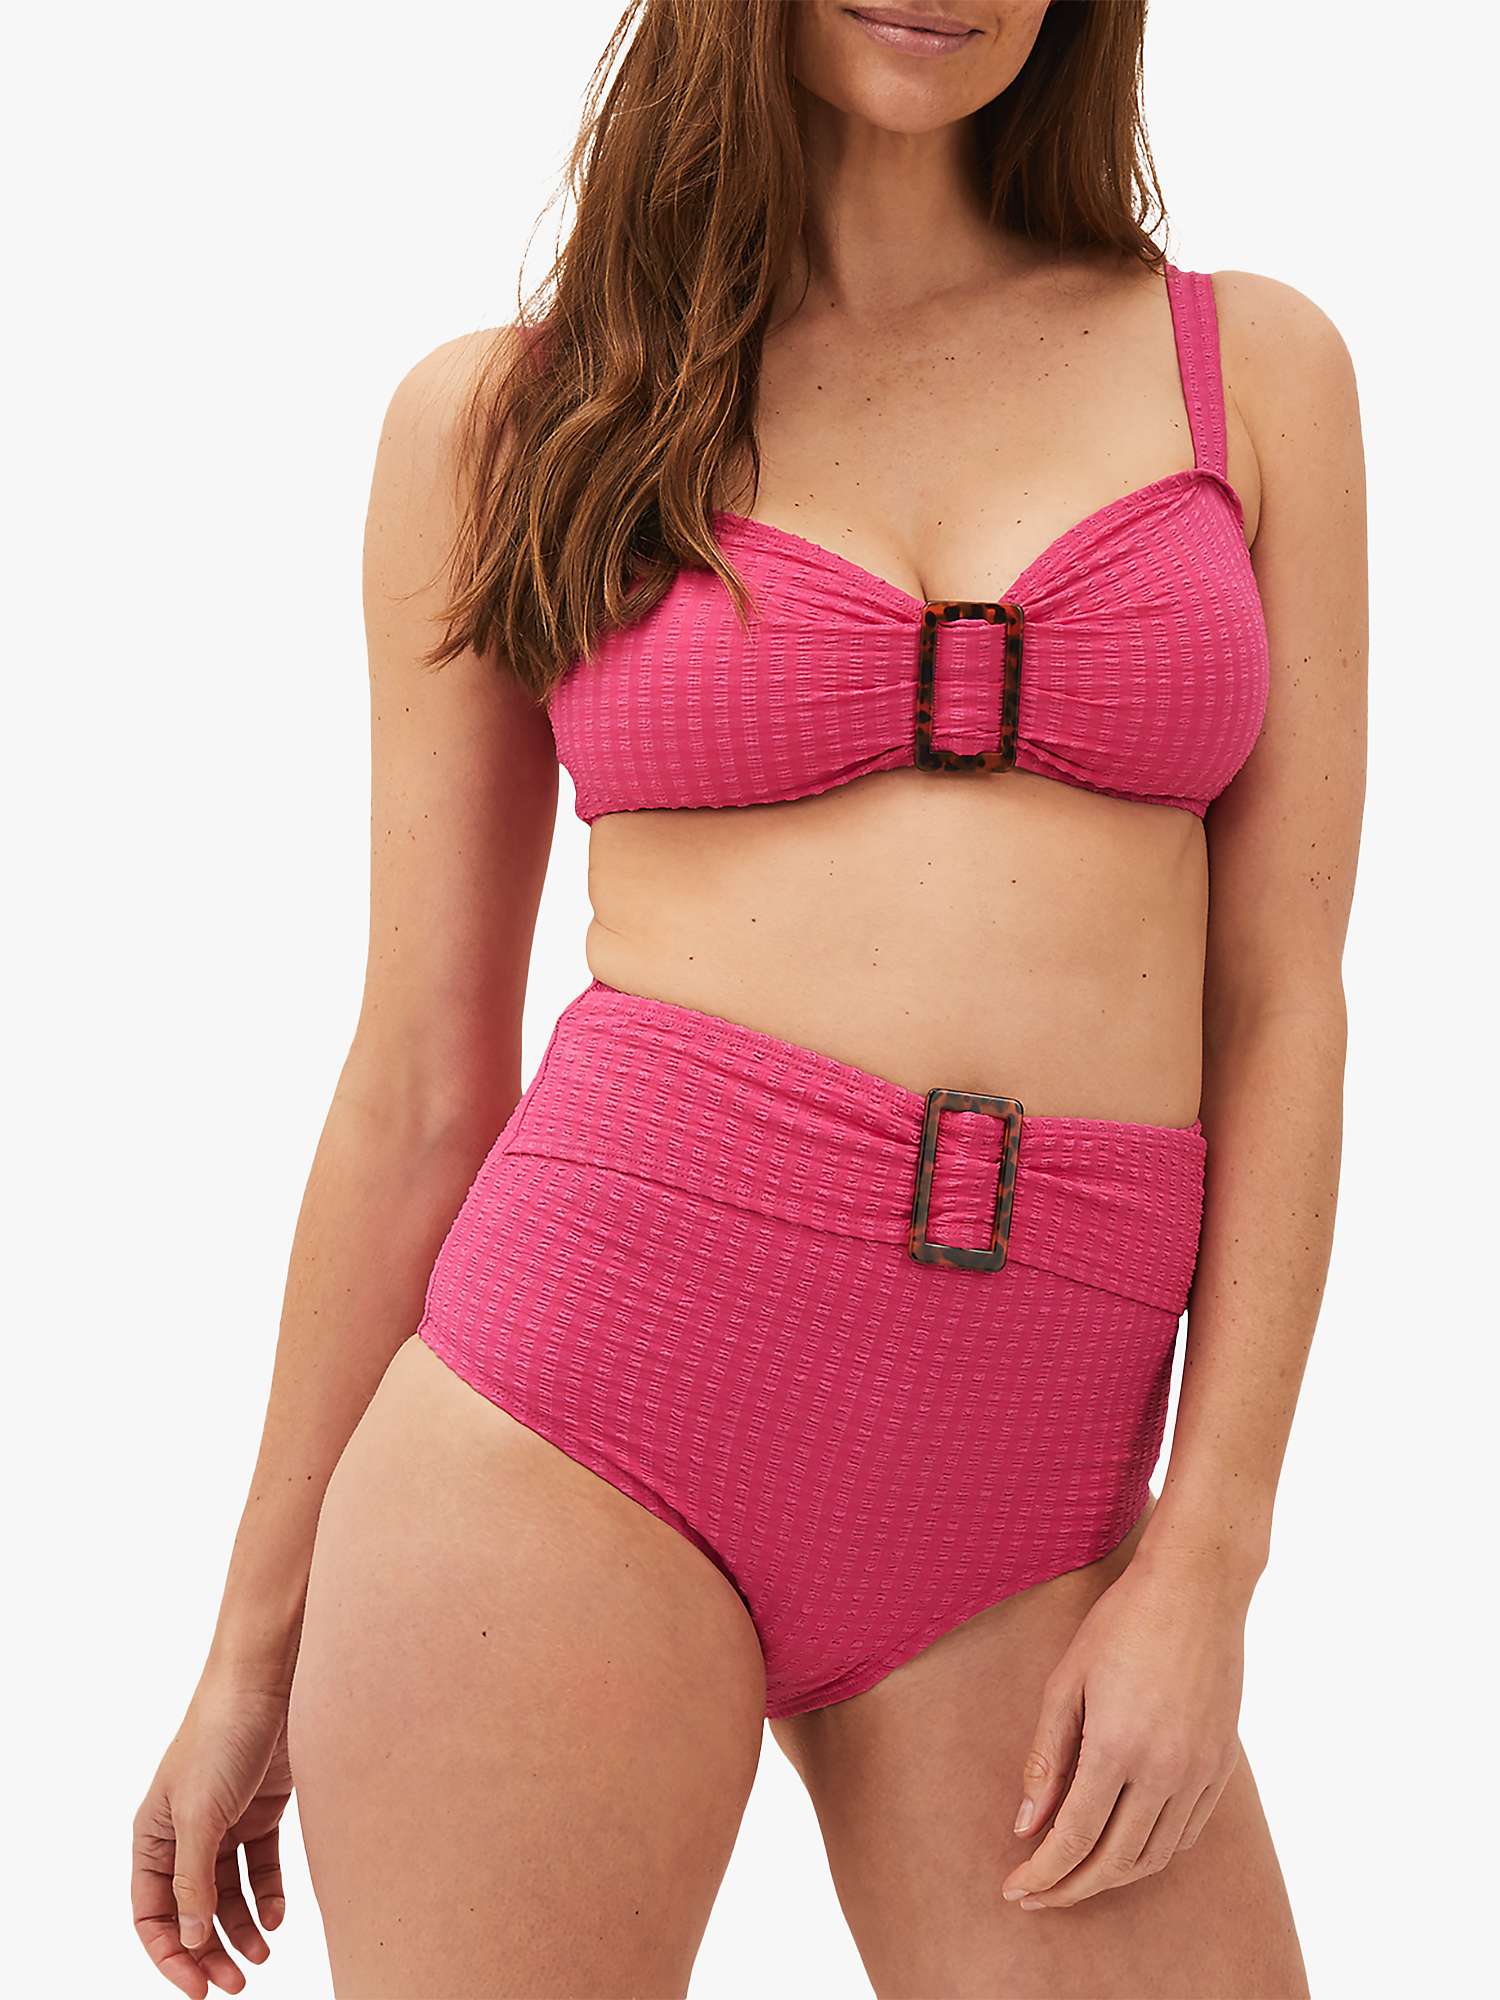 Buy Phase Eight Annabelle Textured Bikini Top, Hot Pink Online at johnlewis.com